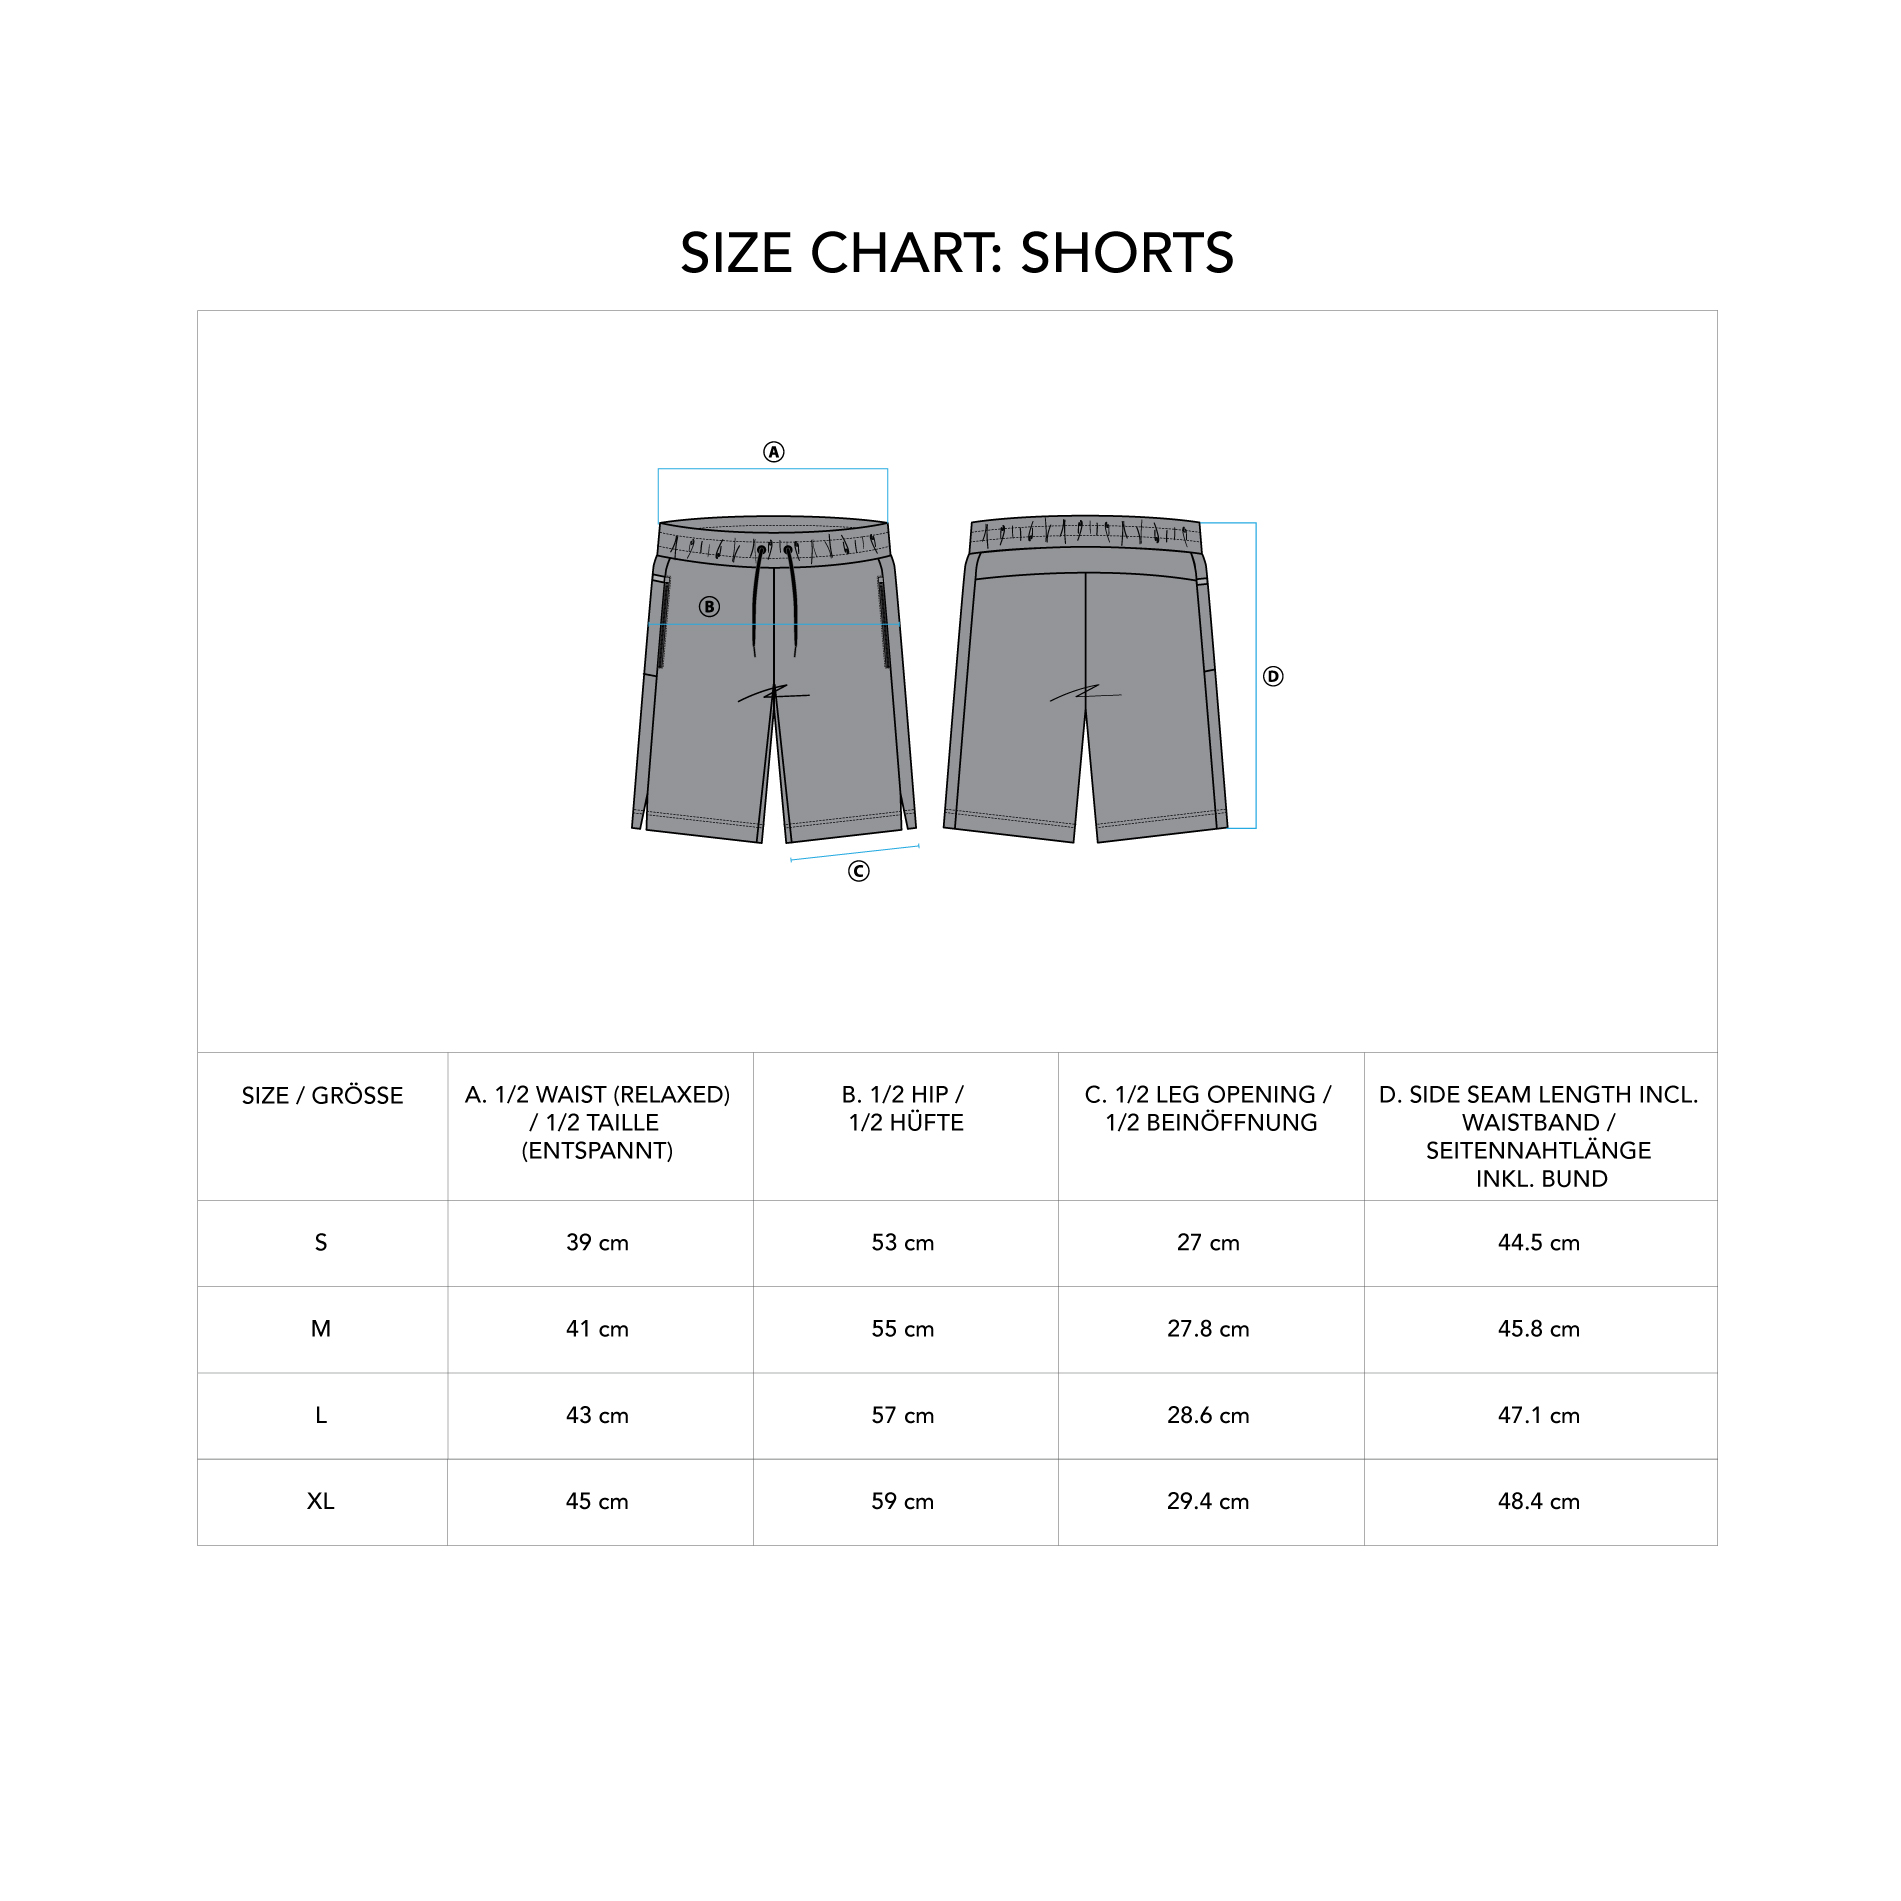 Essential Techno 9 inch Shorts for Men - size chart